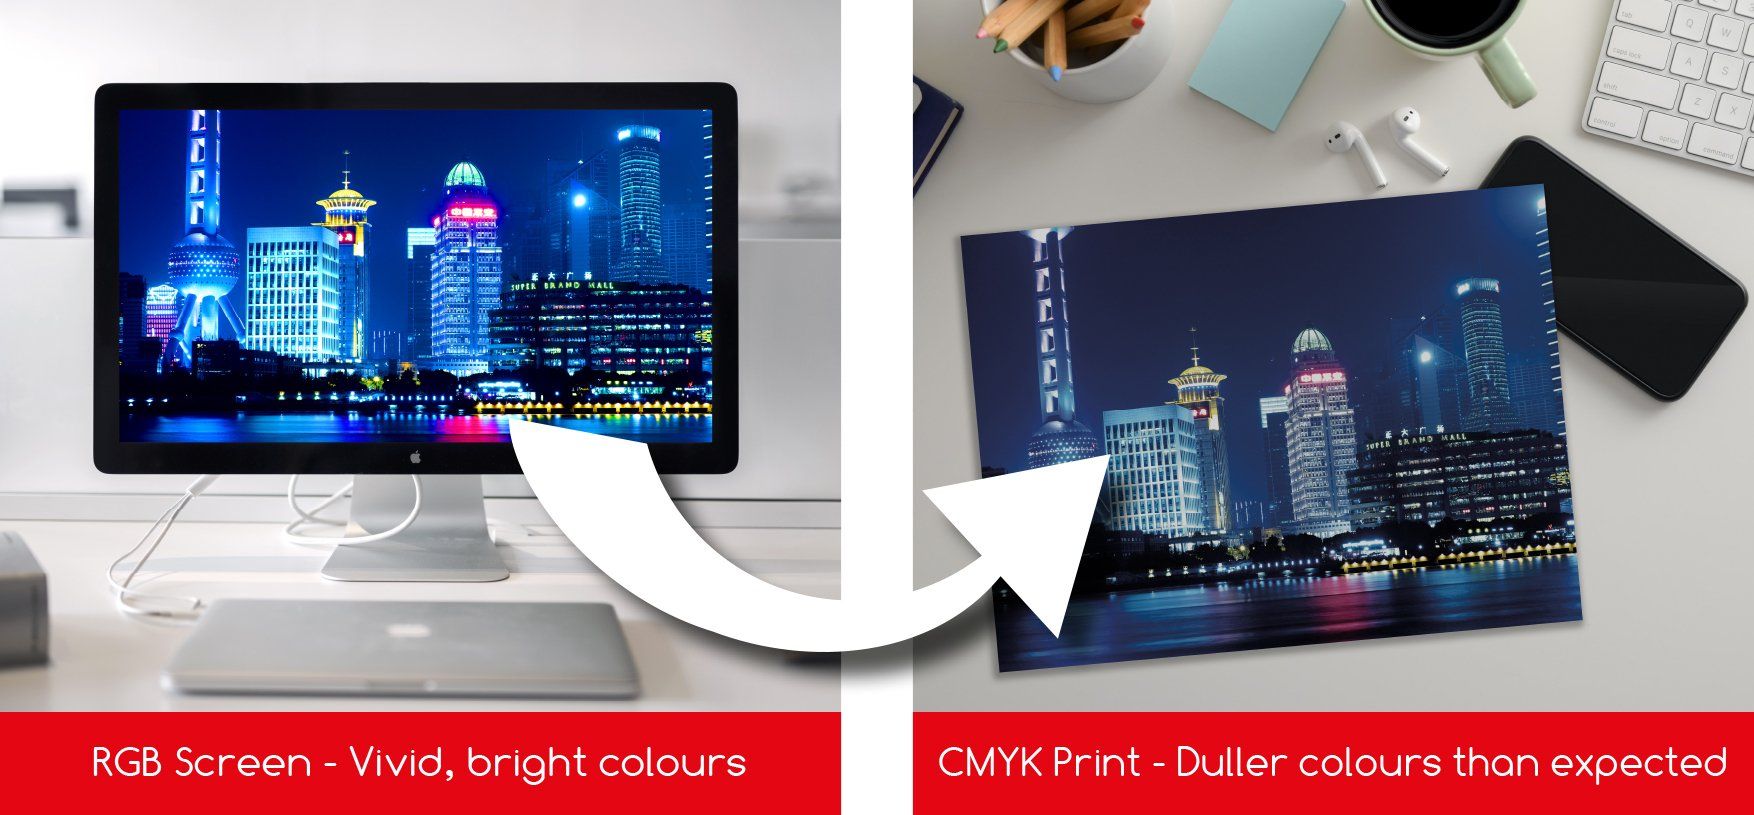 vores skulder Arv The battle of RGB vs CMYK - which should you pick and why